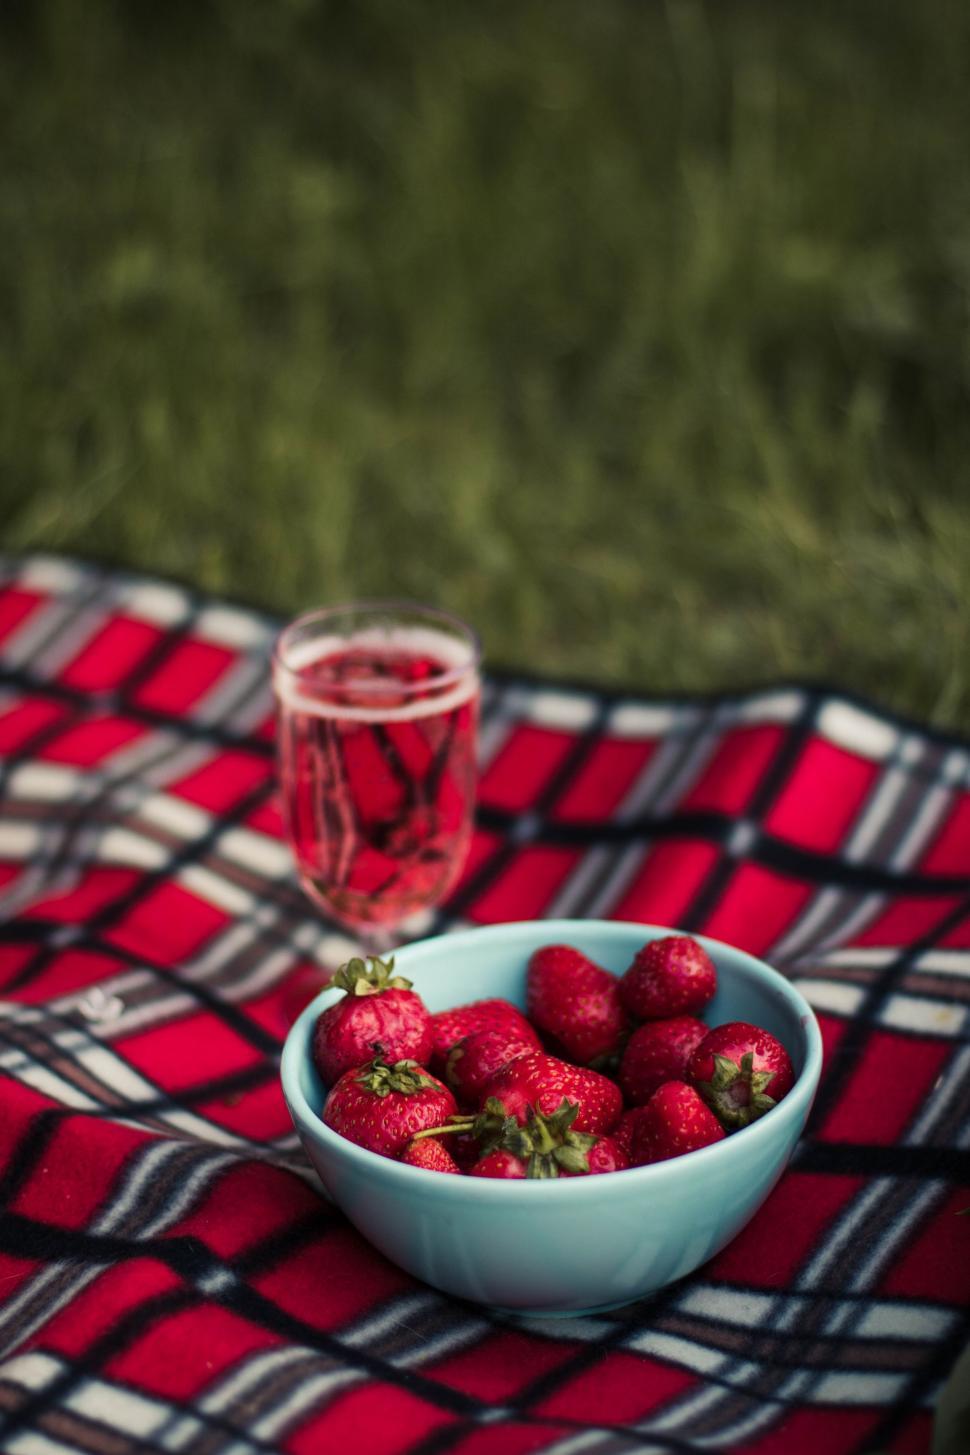 Free Image of Strawberries and Juice Glass  